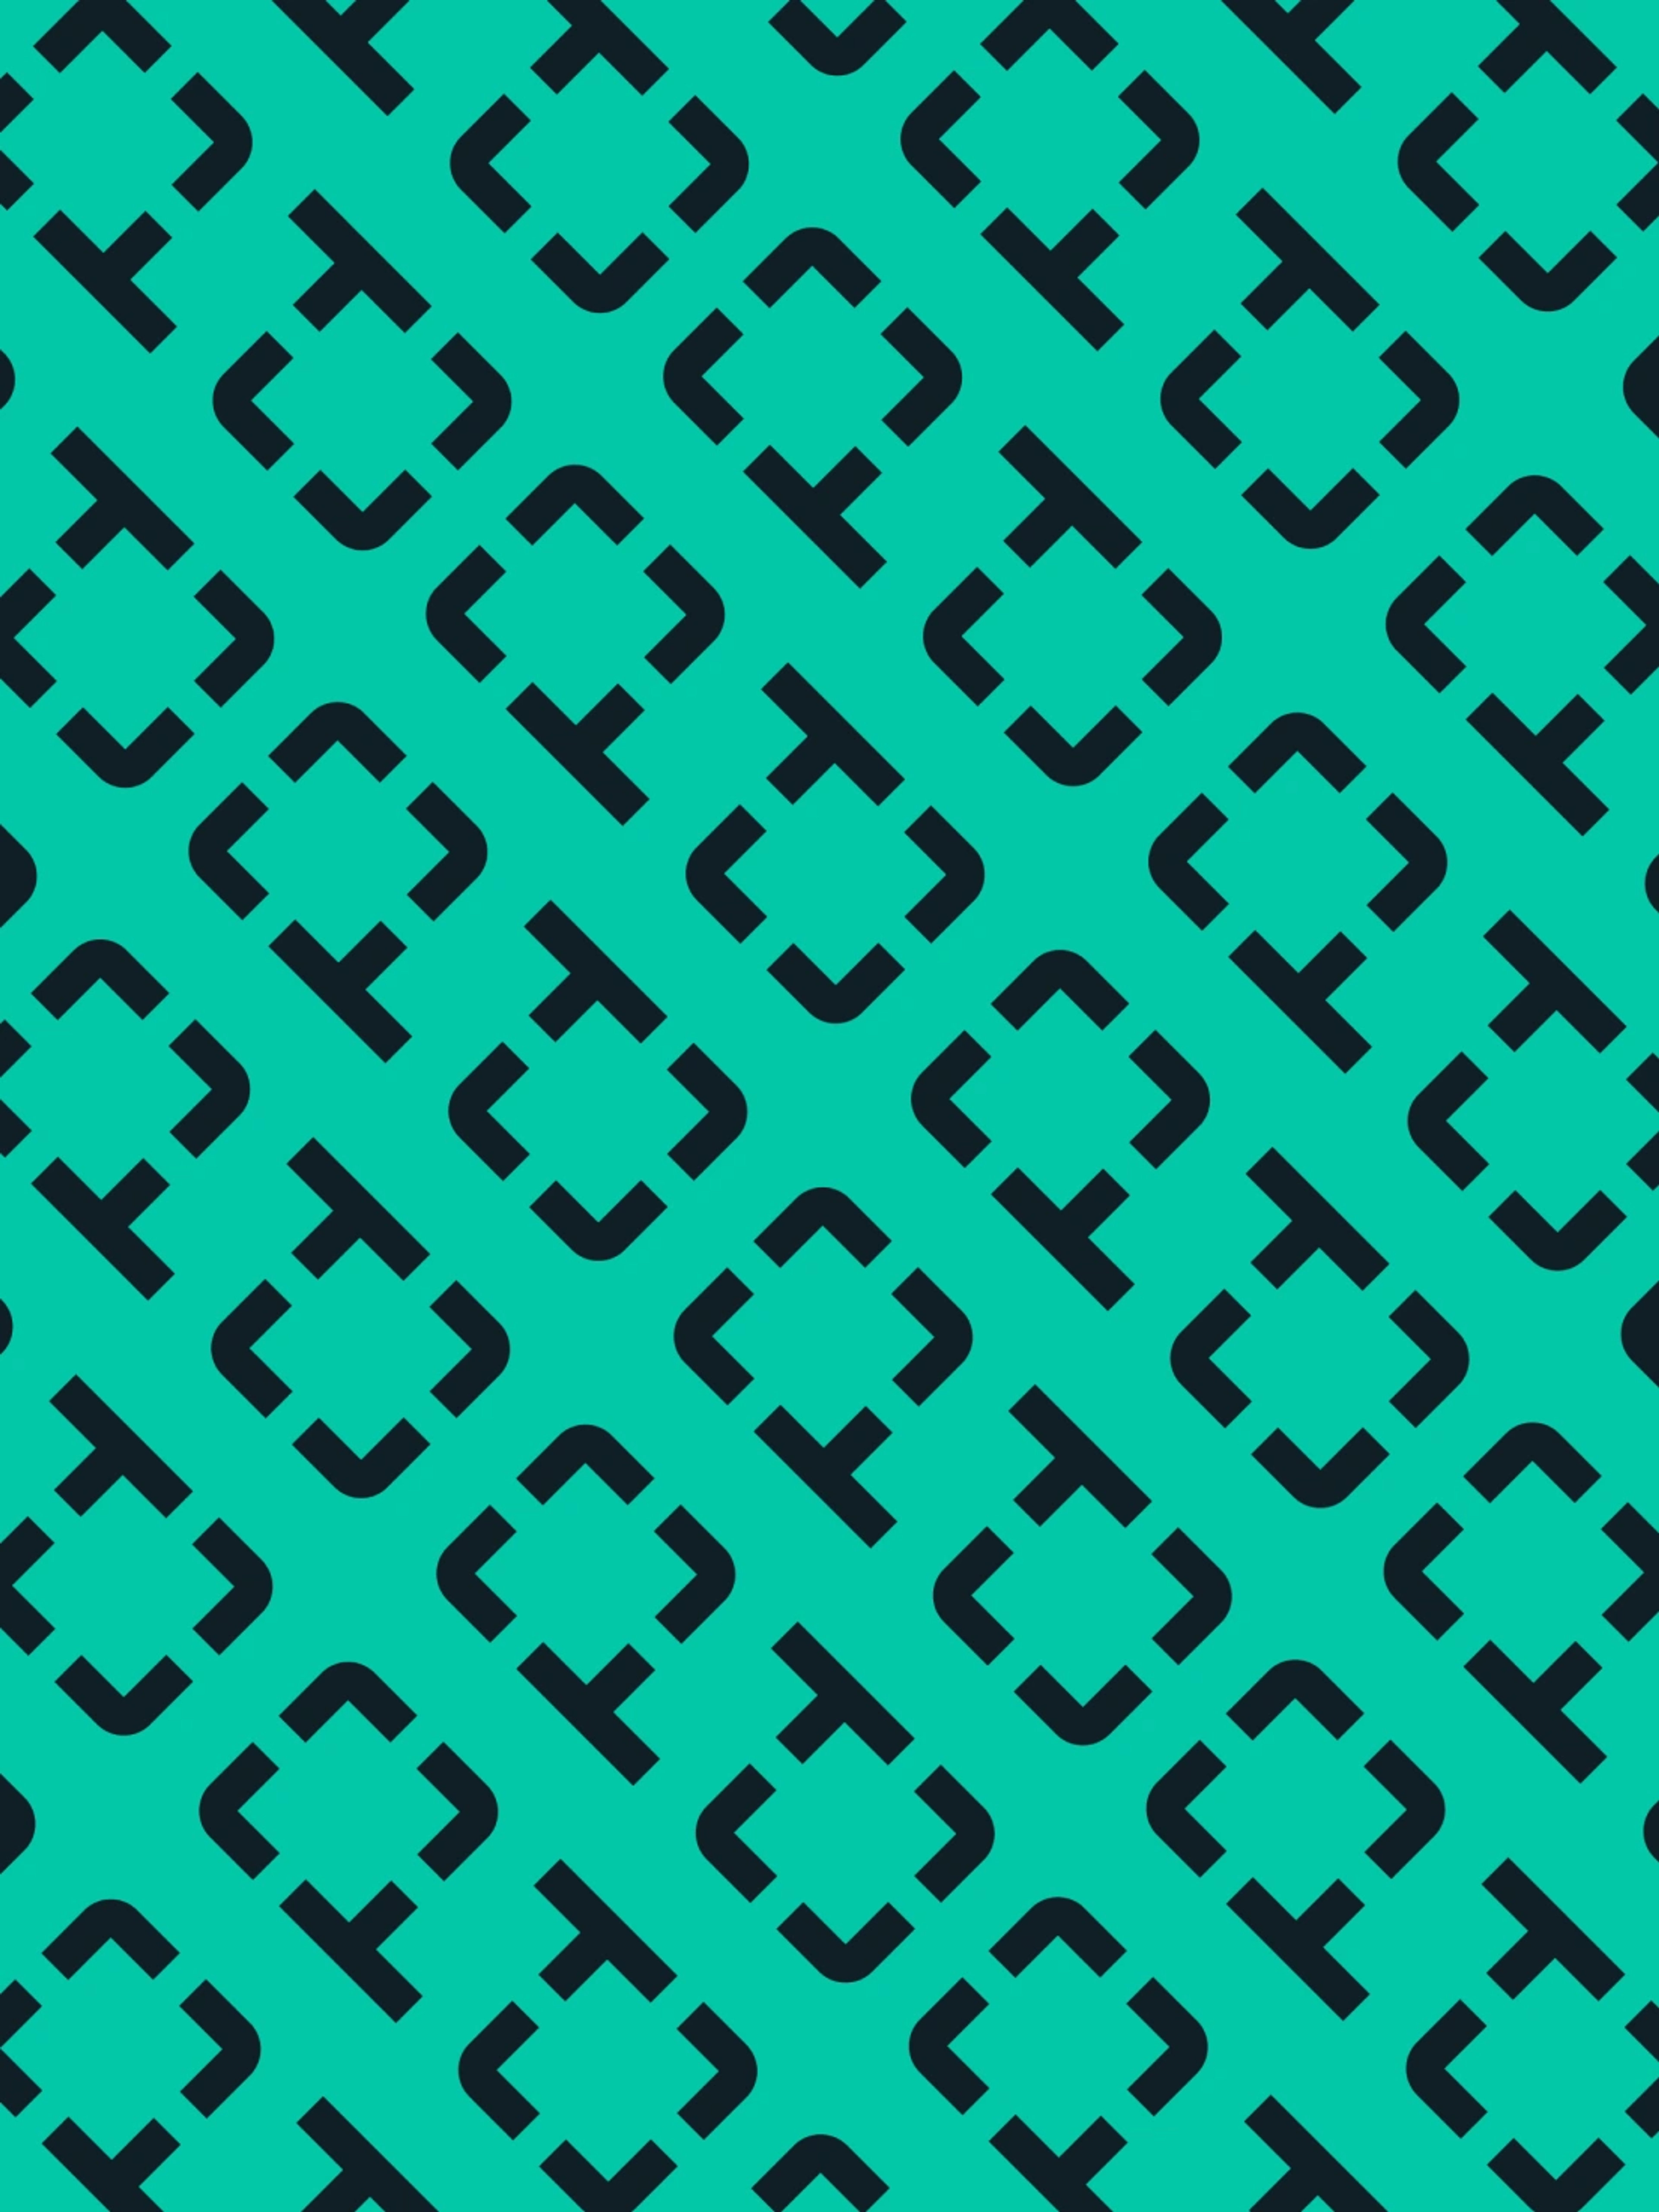 Perfectly Clear logo pattern